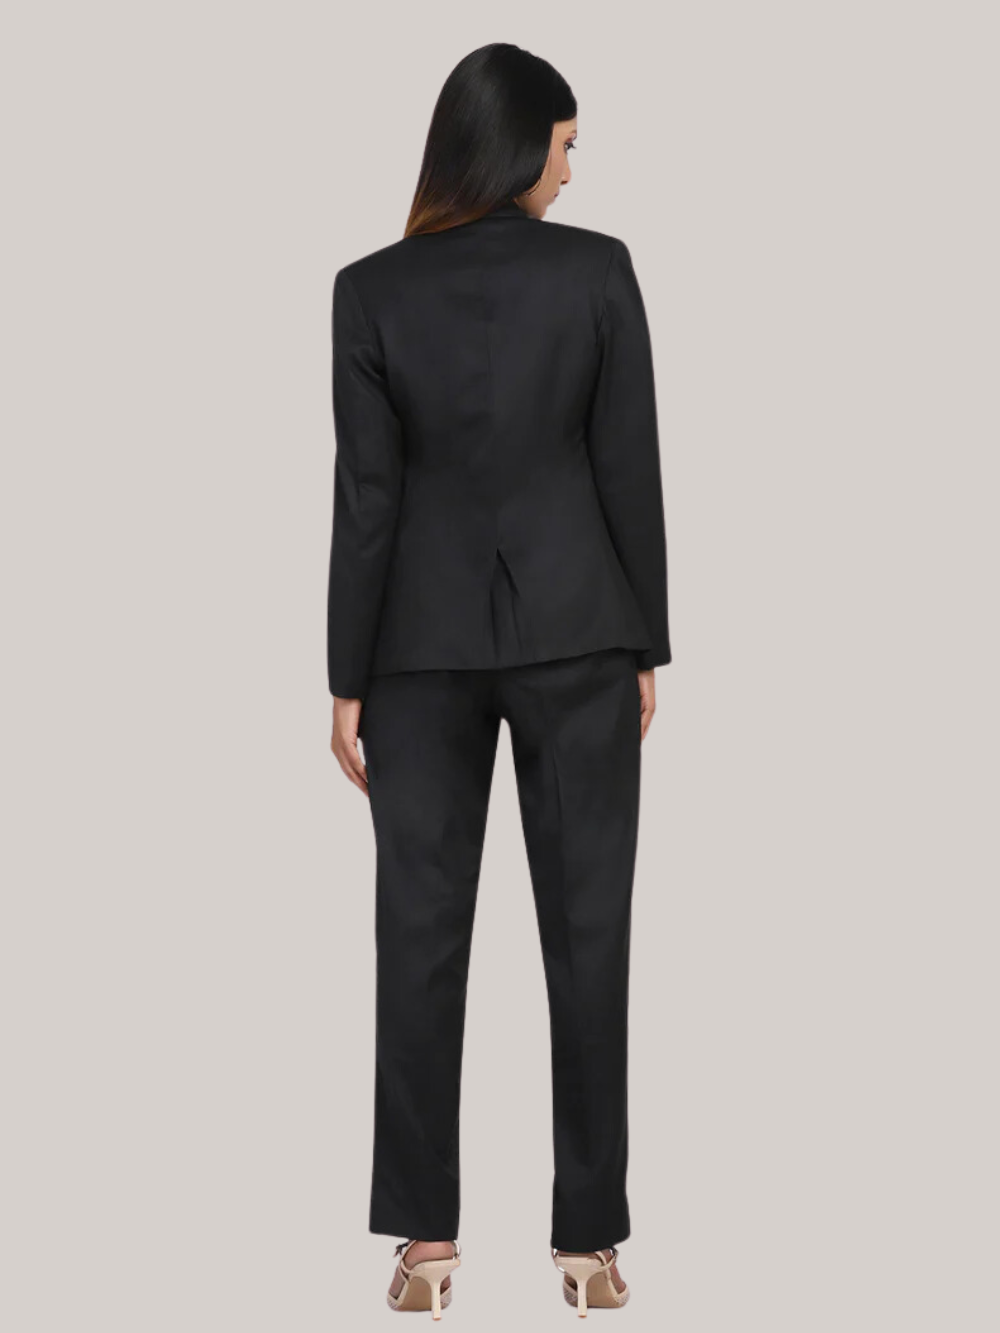 Classy Pantsuit for Women Online At Best Prices - Black